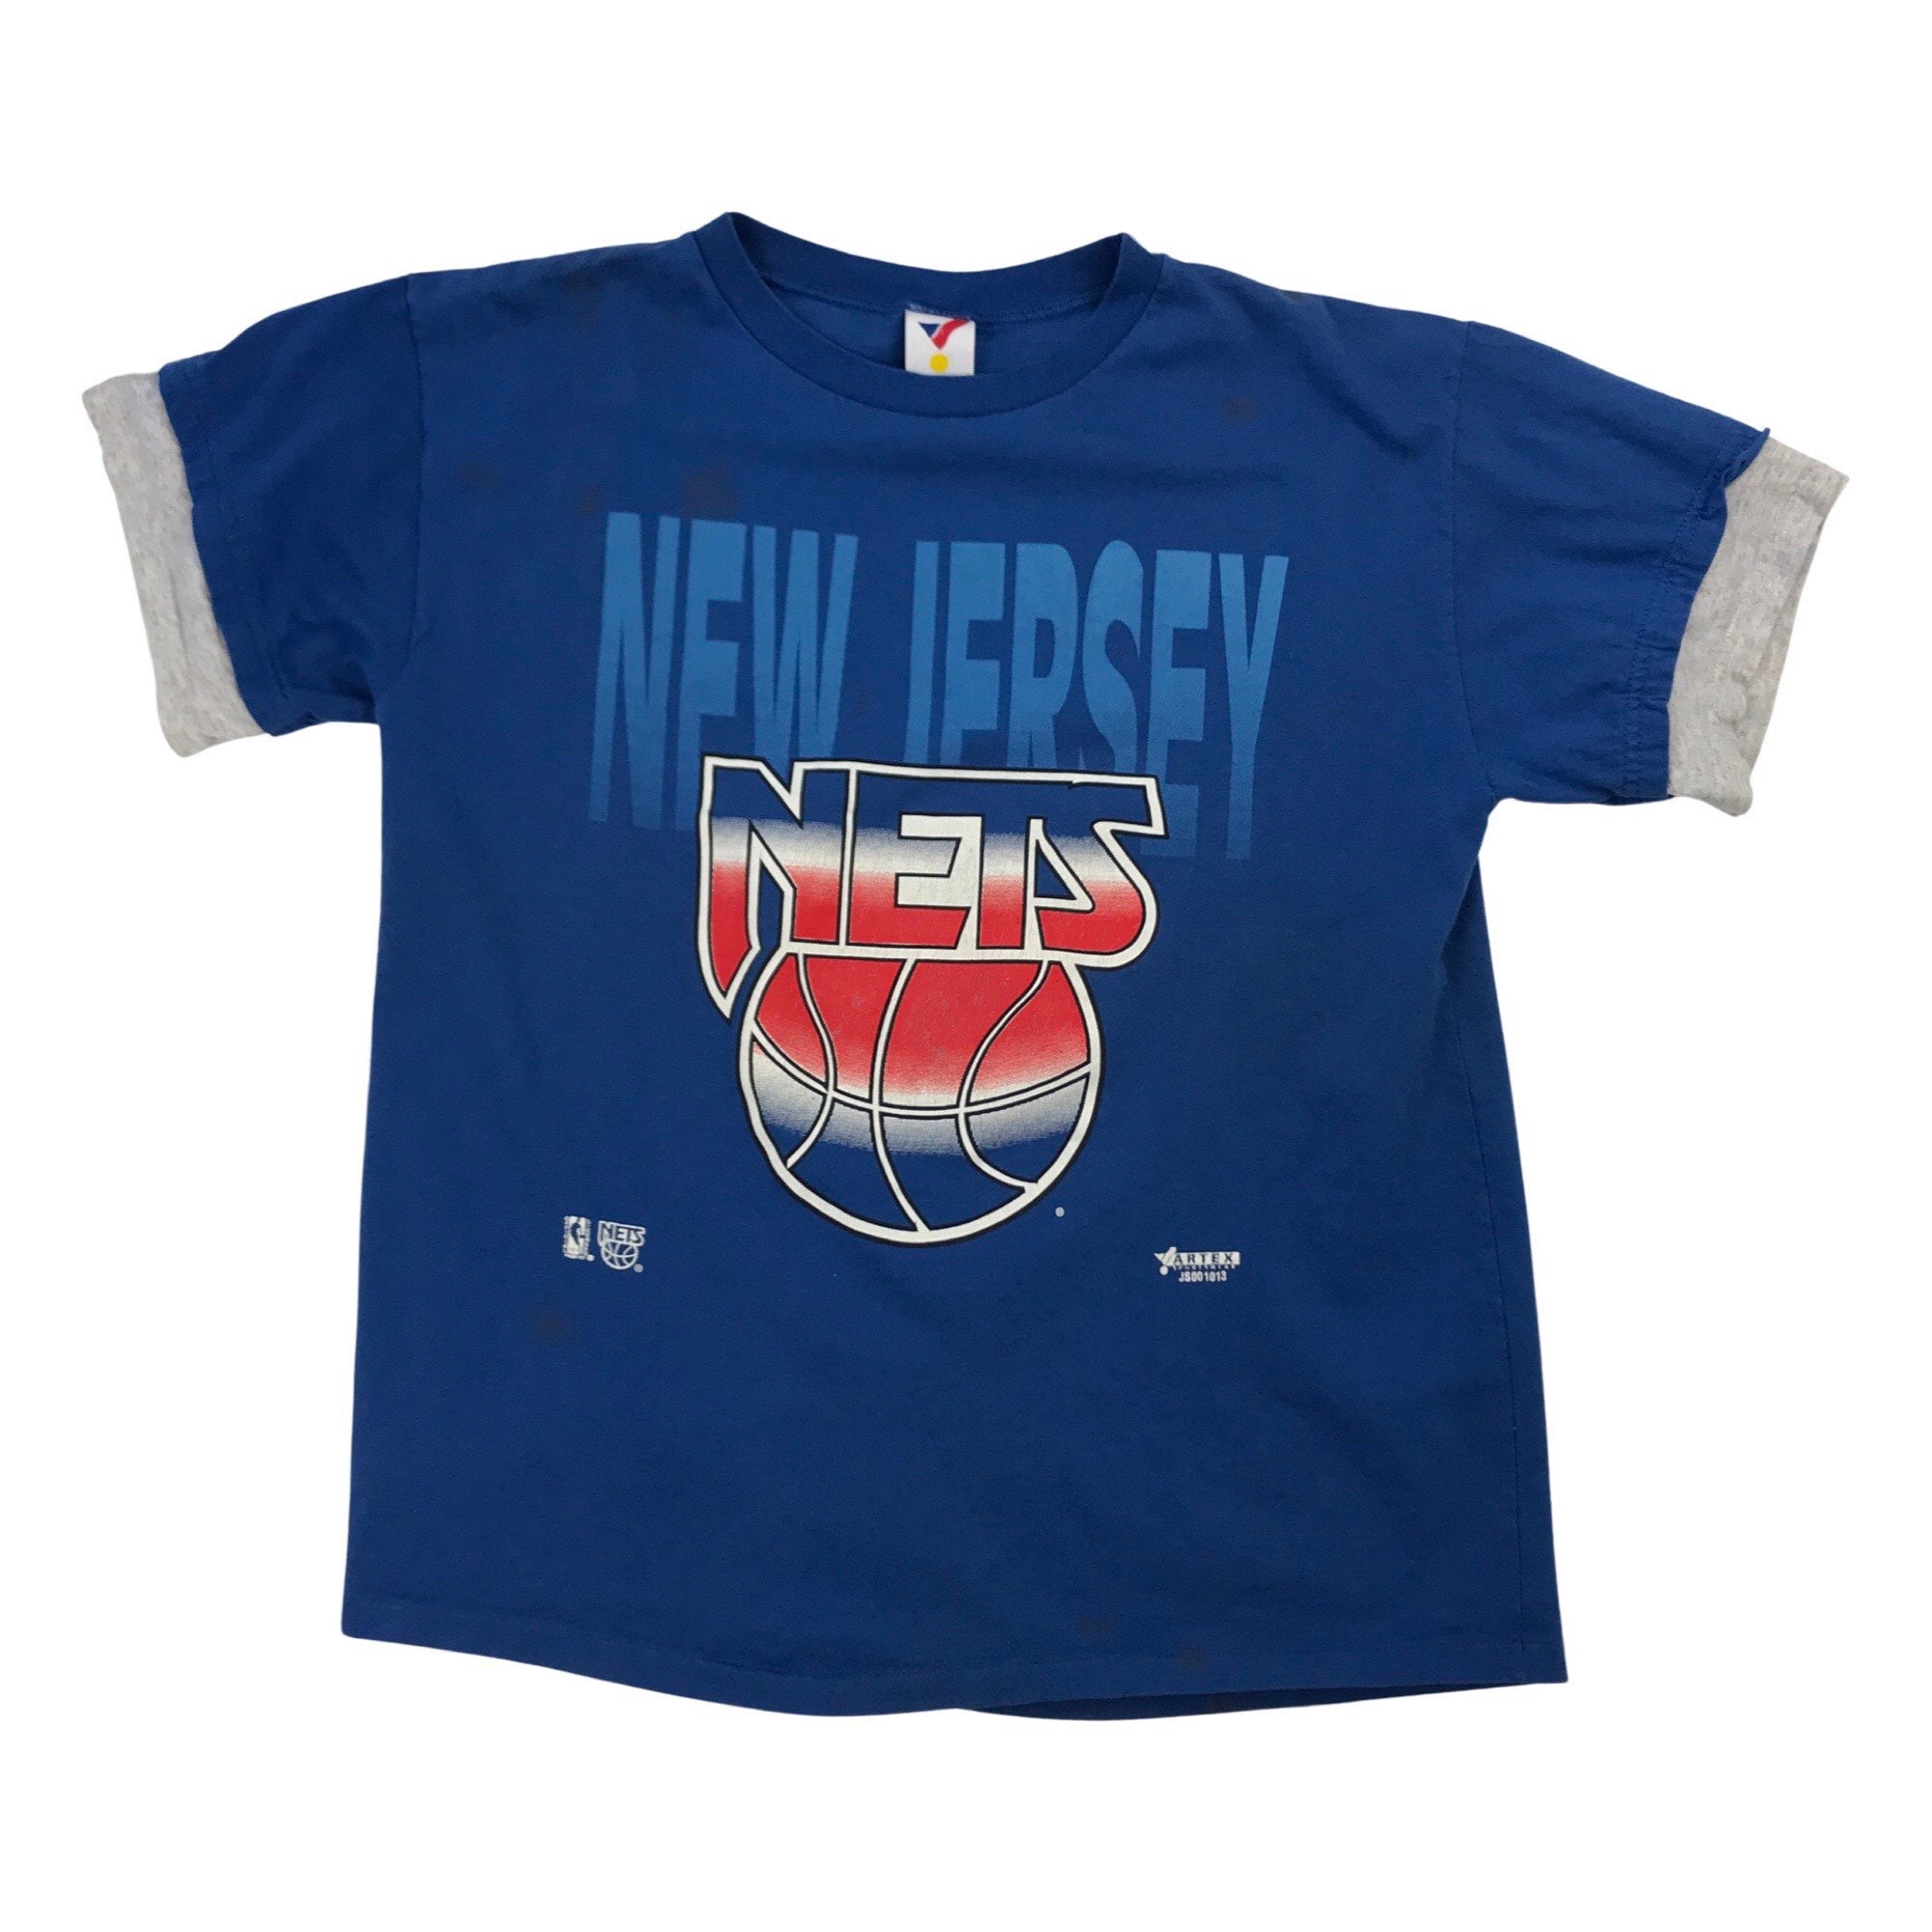 New Jersey Nets T-Shirt Womens Large L V-Neck Navy Blue Red Font NBA Store  NWT